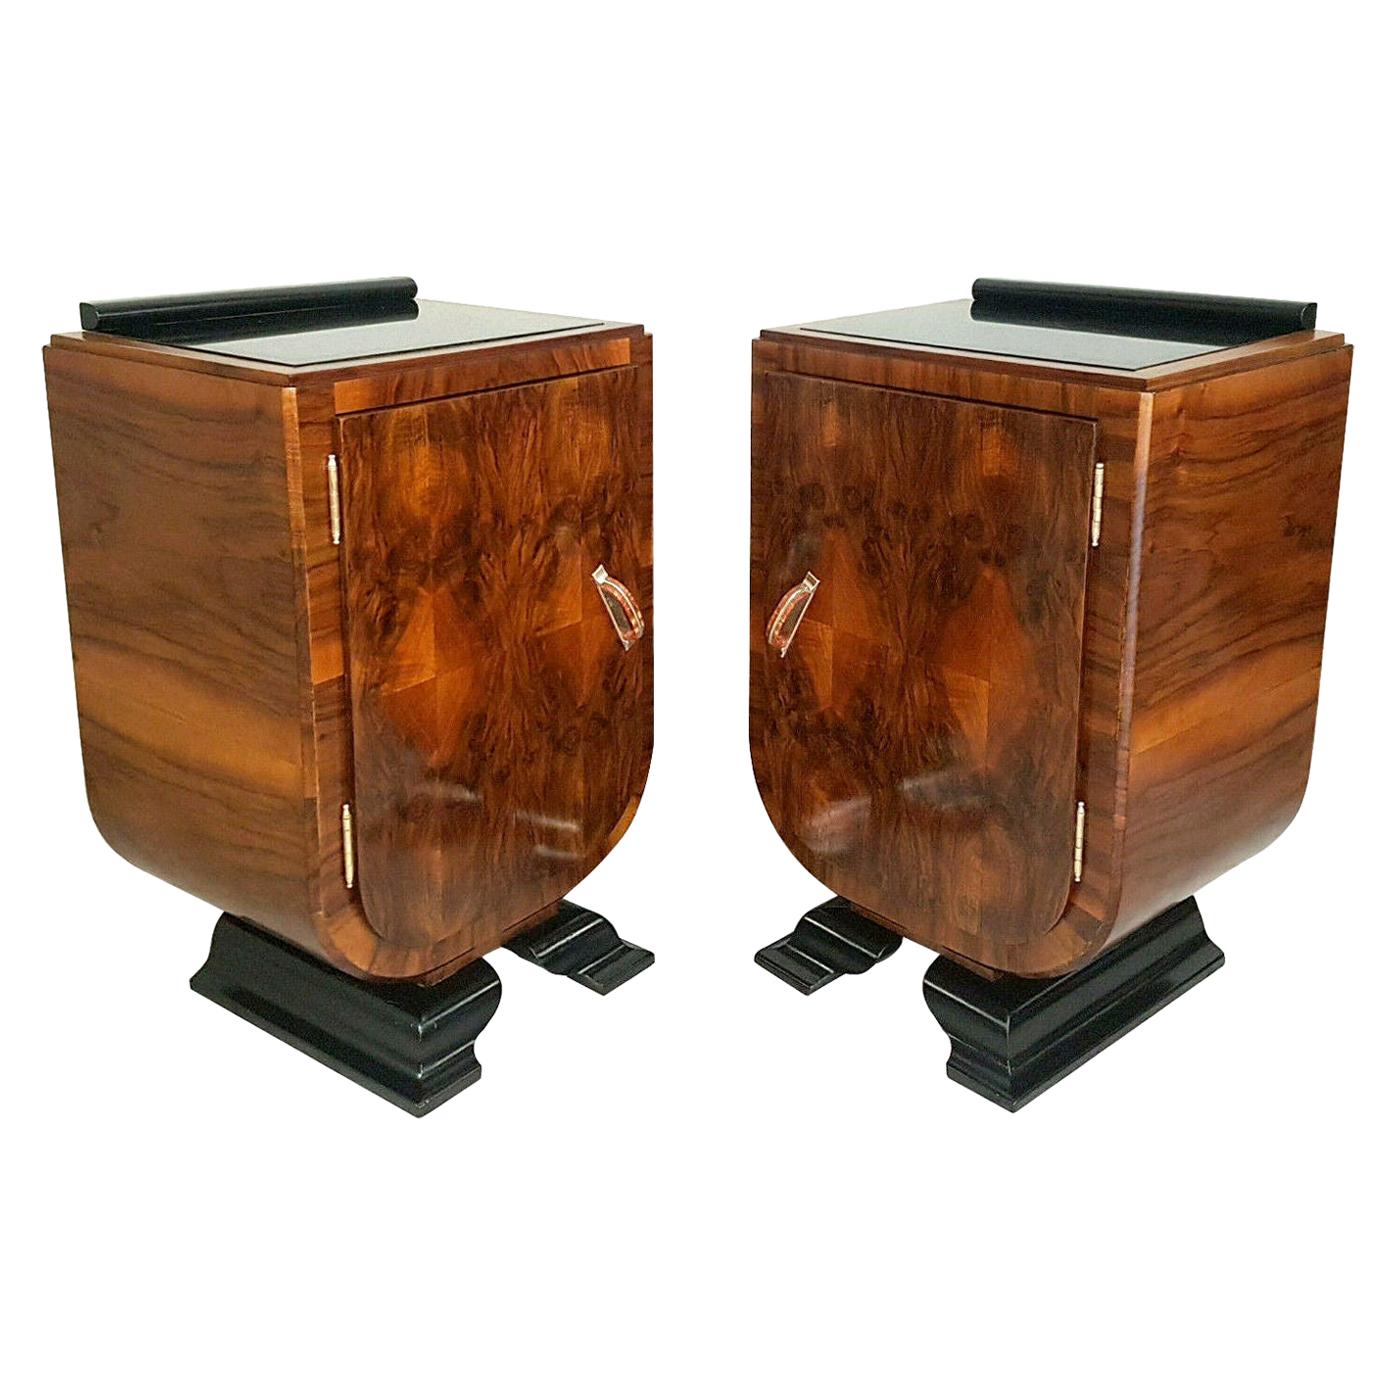 Art Deco Italian Pair of Matching Bedside Table Cabinets, circa 1930